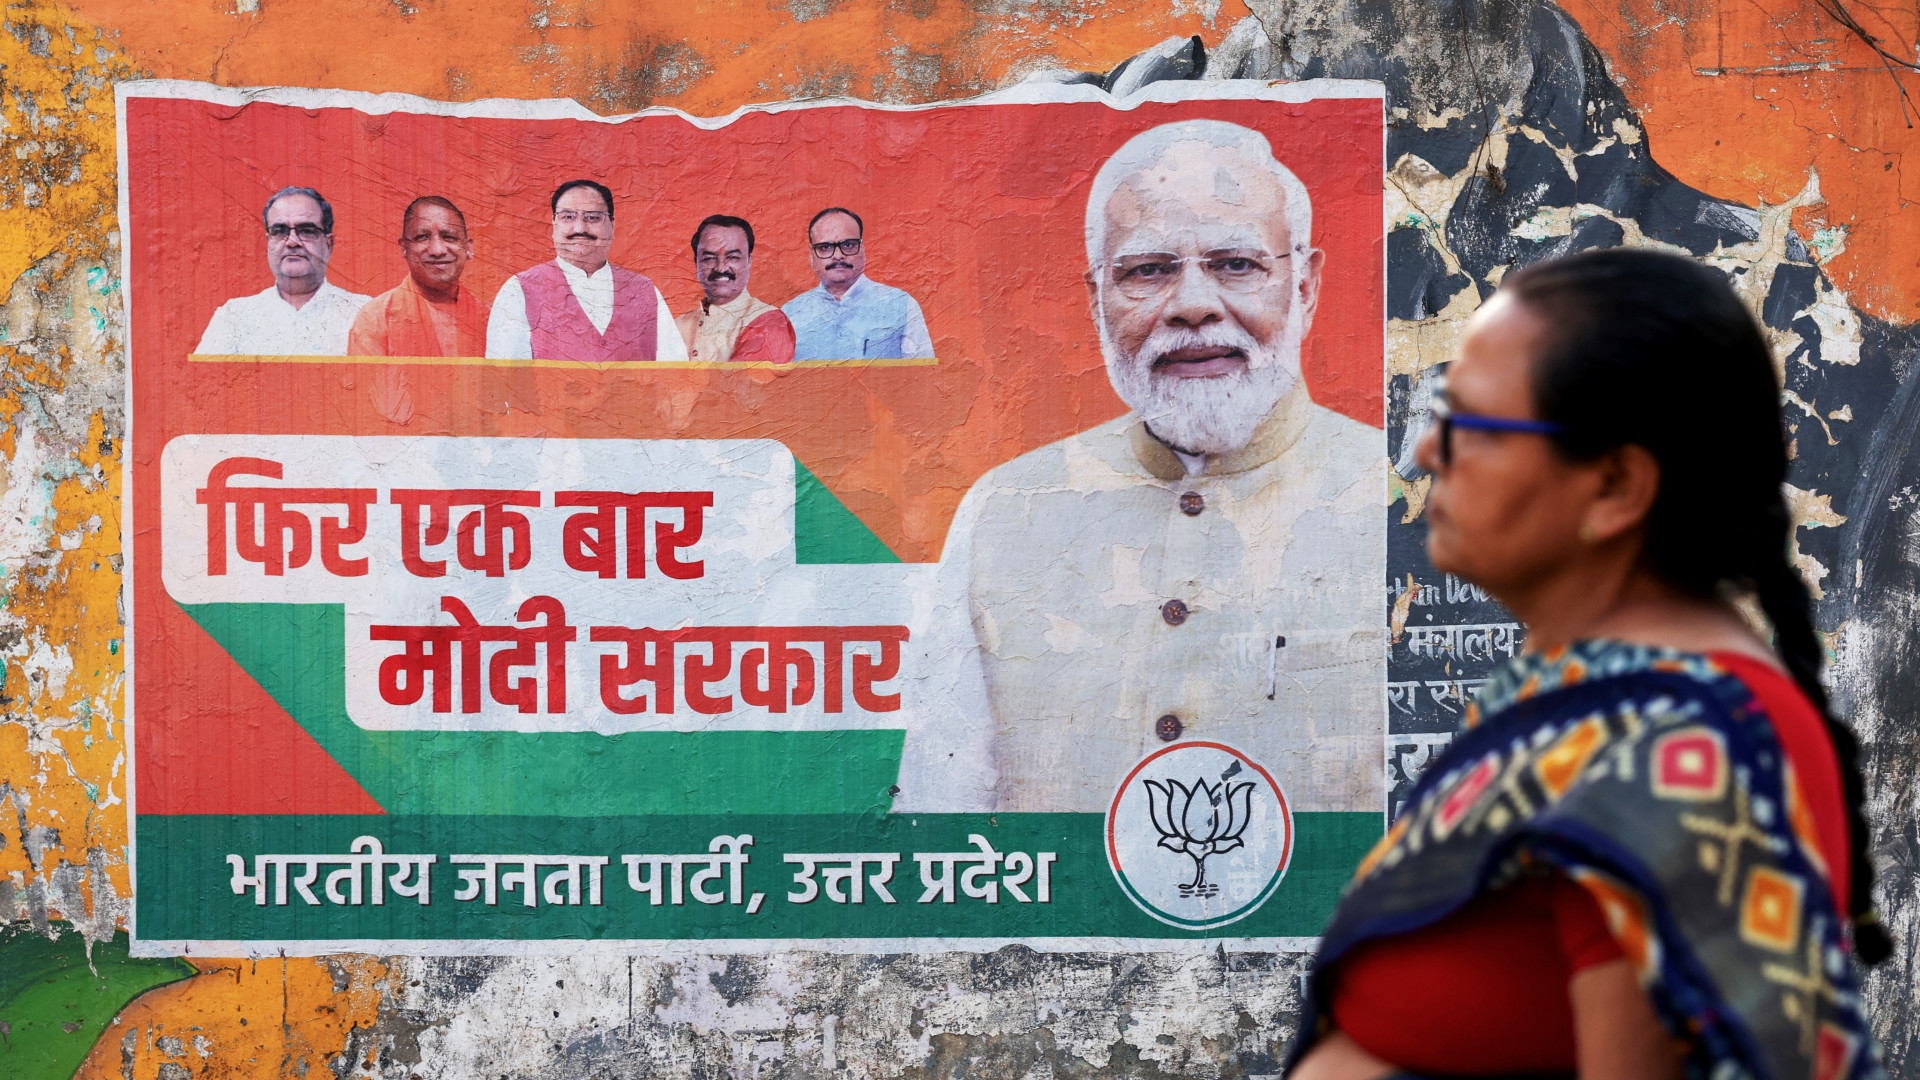 A woman walks past an election campaign poster of the Bharatiya Janata Party (BJP) featuring their leader and India's Prime Minister Narendra Modi, right, along a street in Varanasi on 24 March ahead of the country's upcoming general elections (Niharika Kulkarni/AFP)